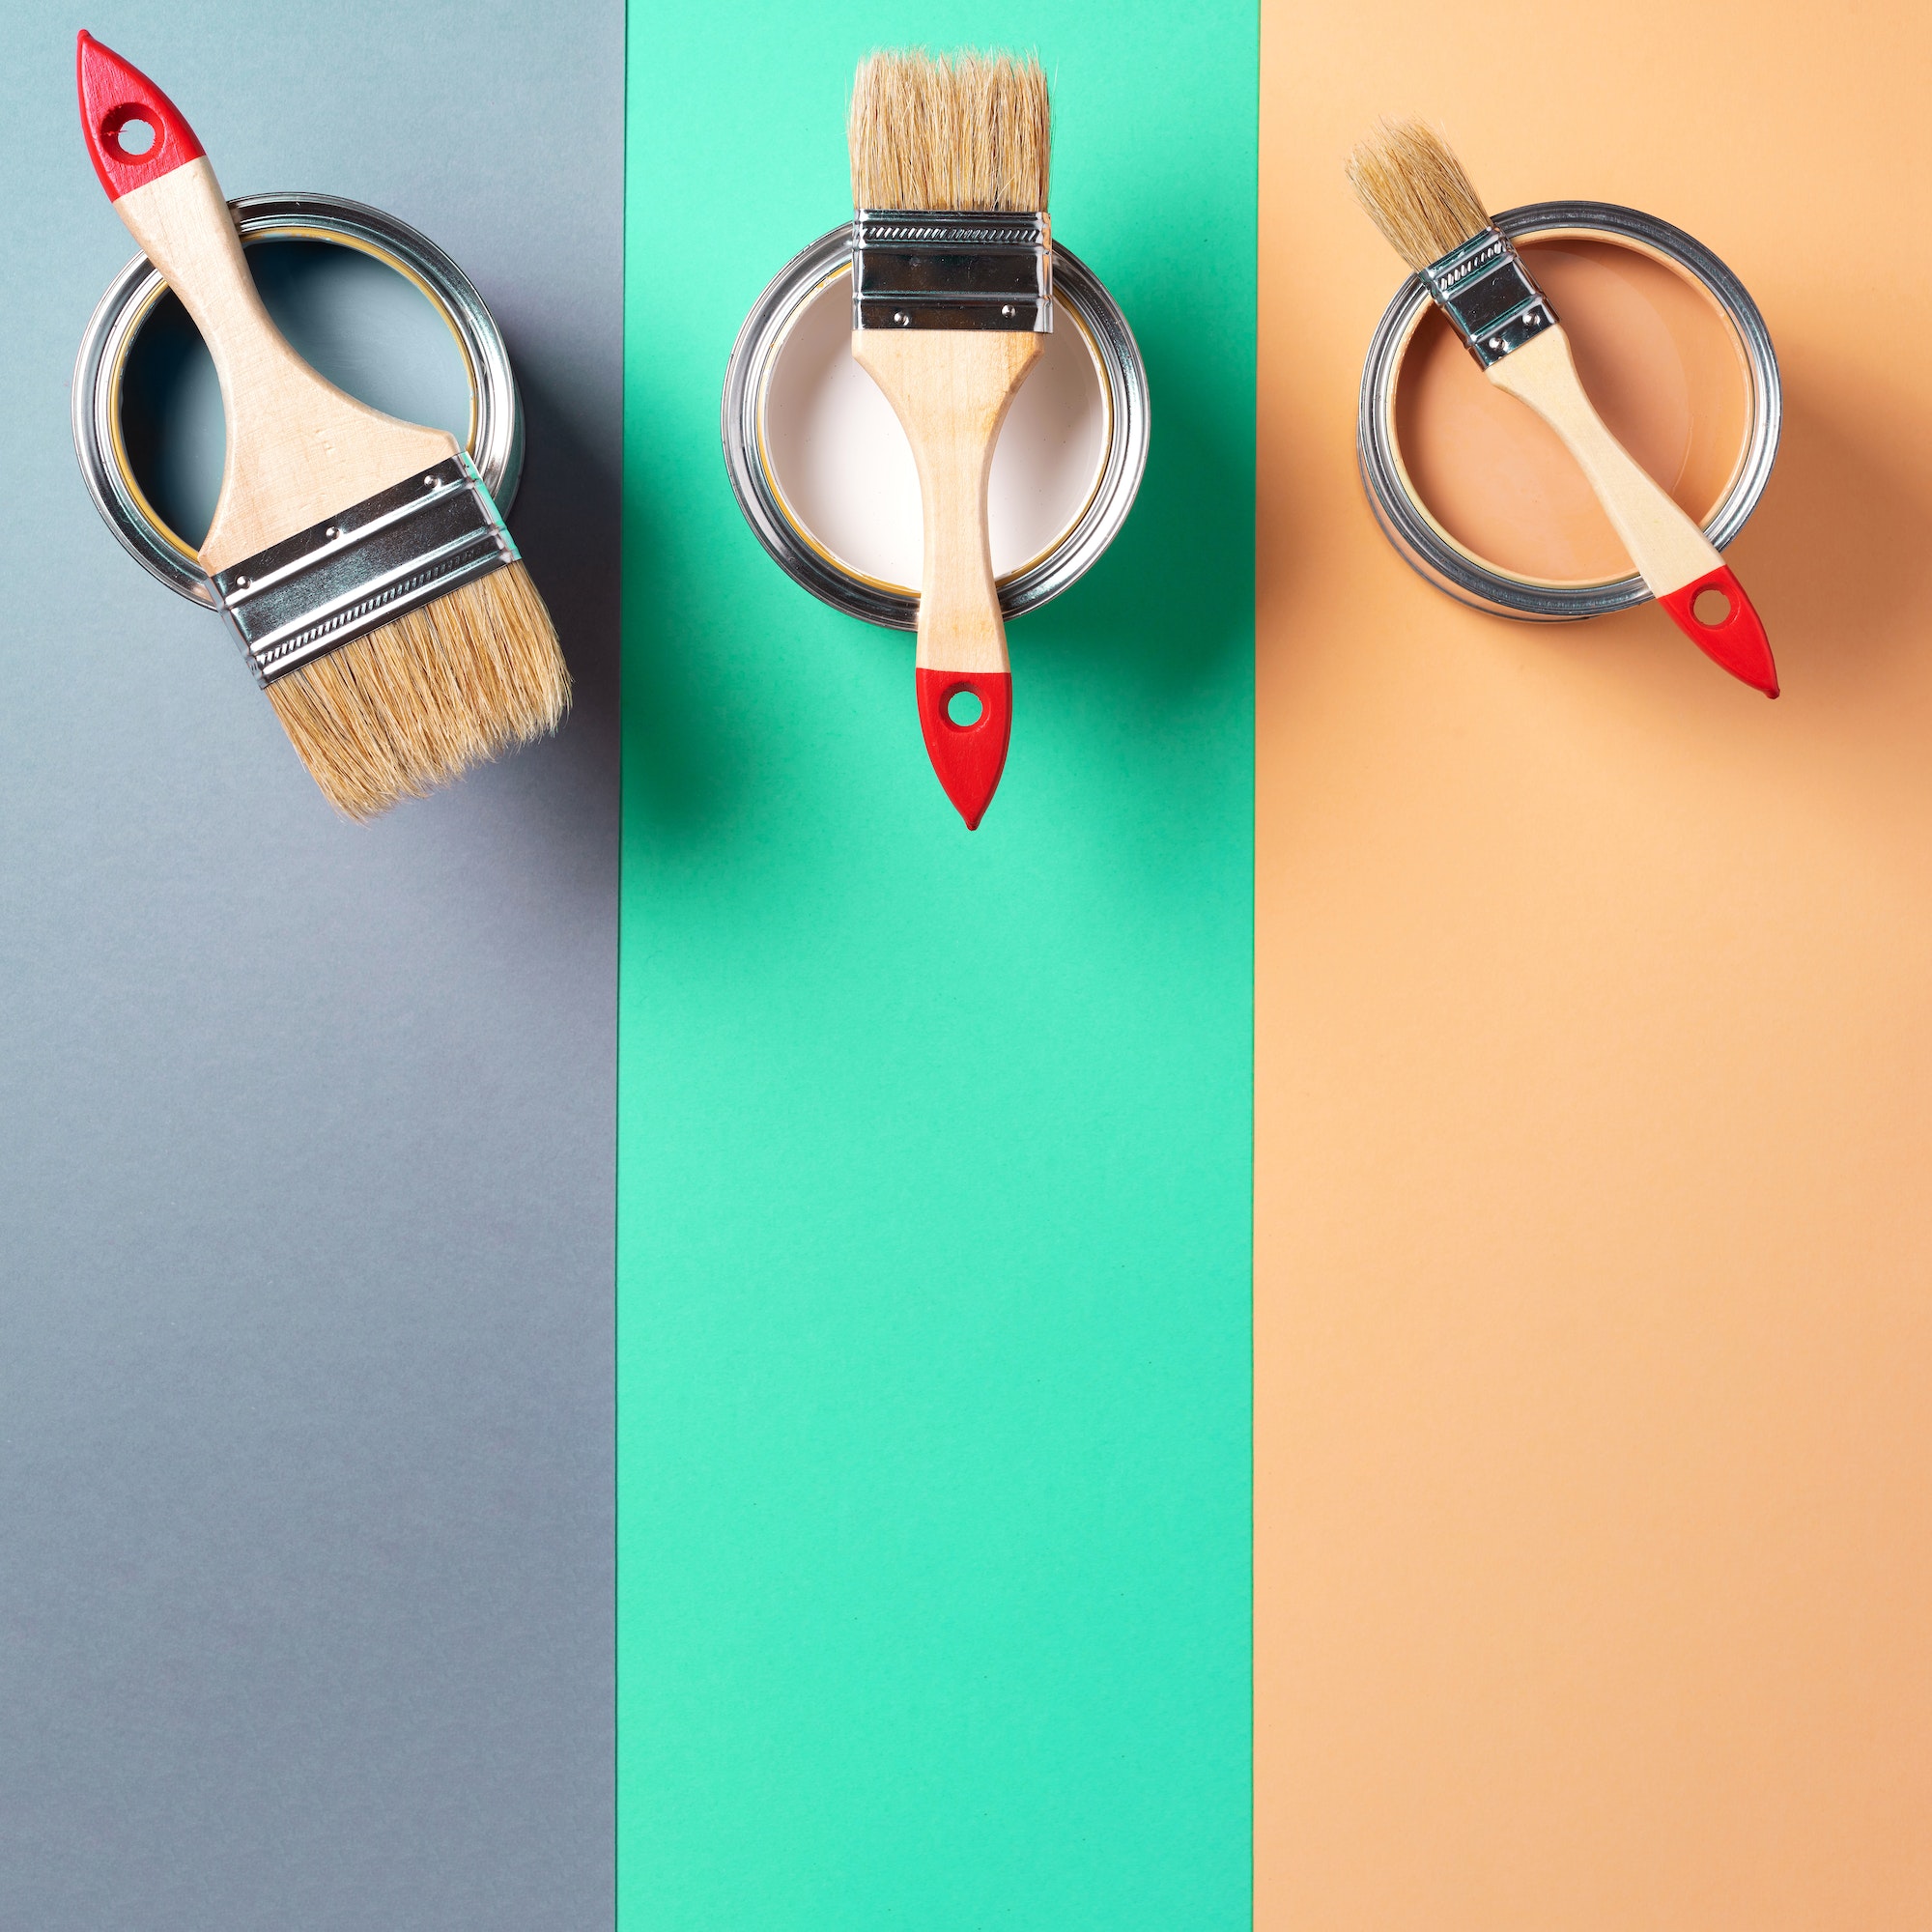 Metal paint cans and paint brushes on multicolor background. Top view. Copy space. Trendy green